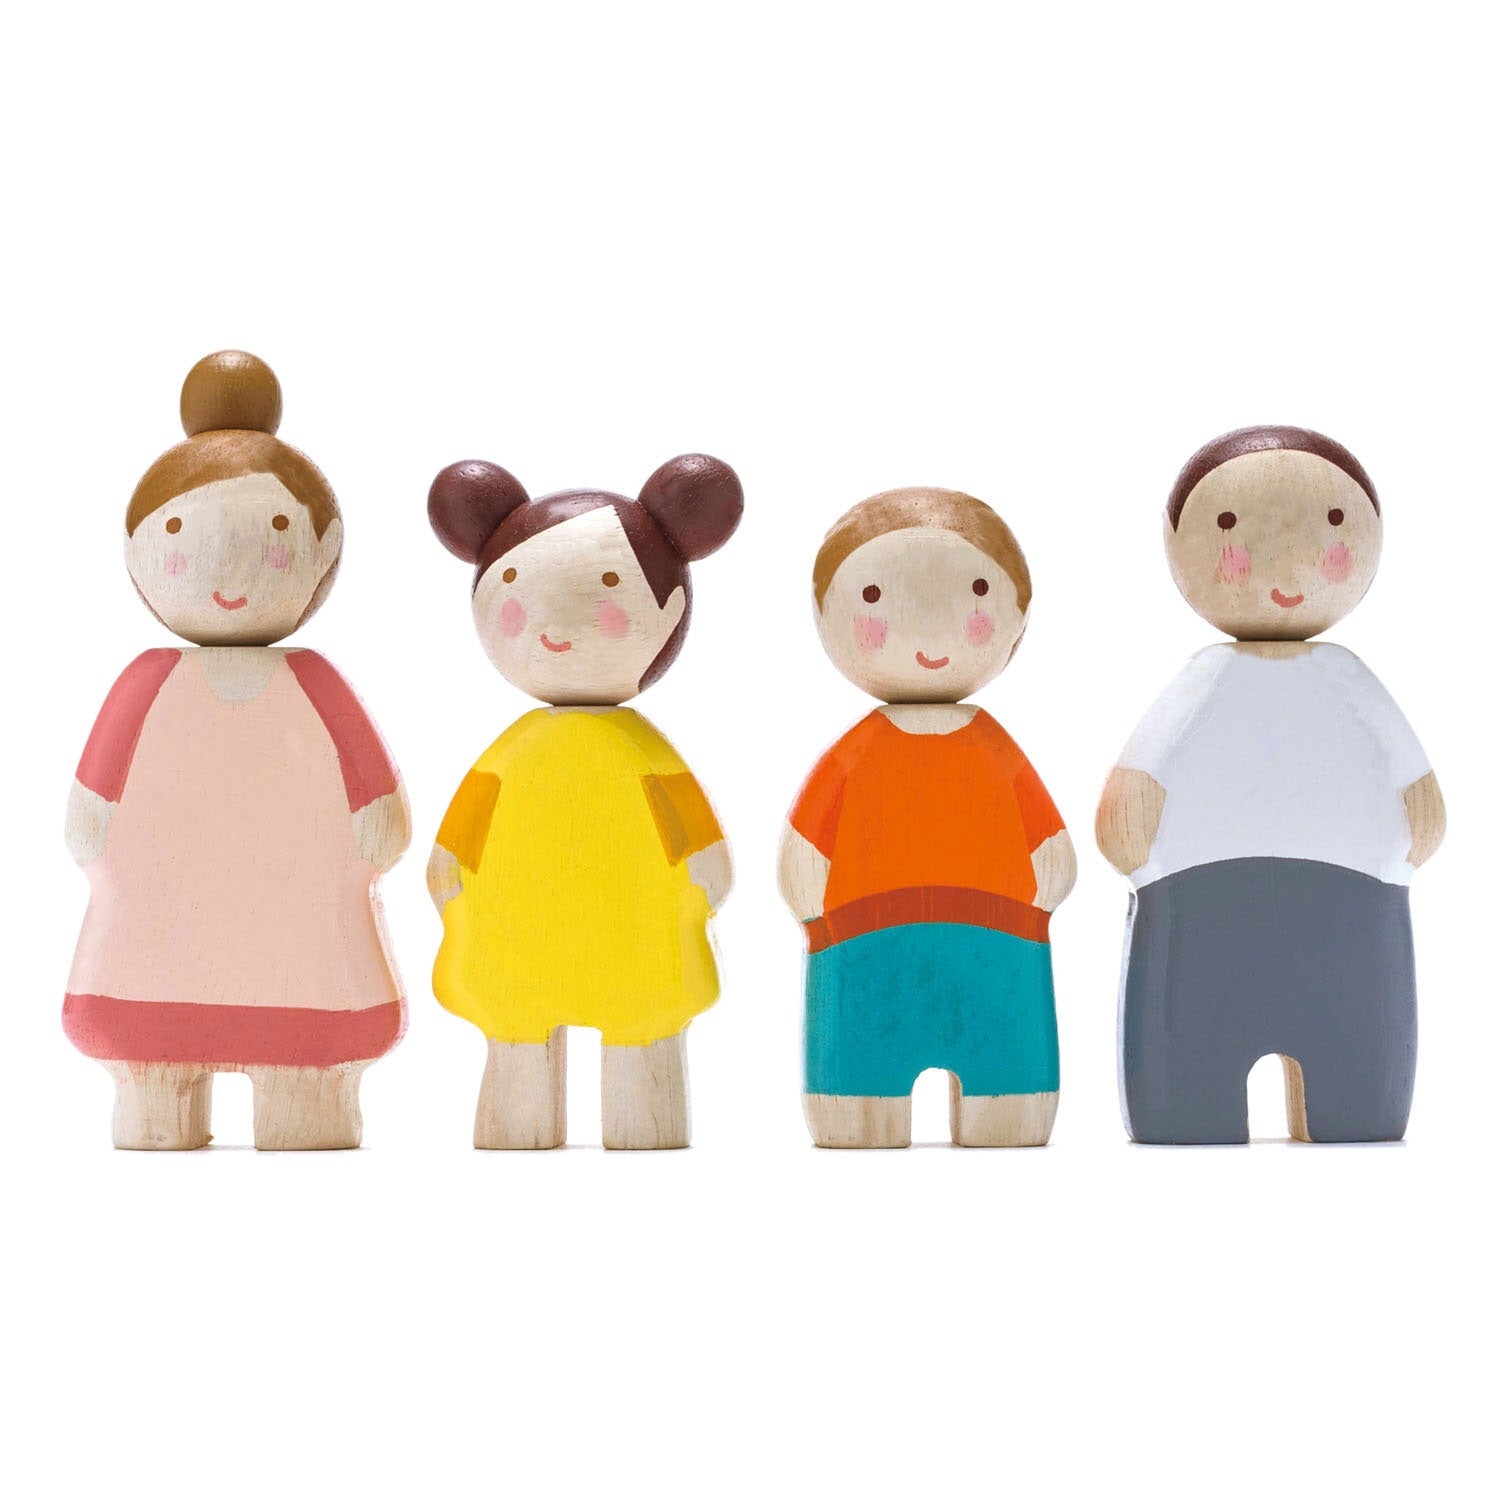 CLEARANCE AS-IS Doll Family of 4 (sturdy arms & legs)